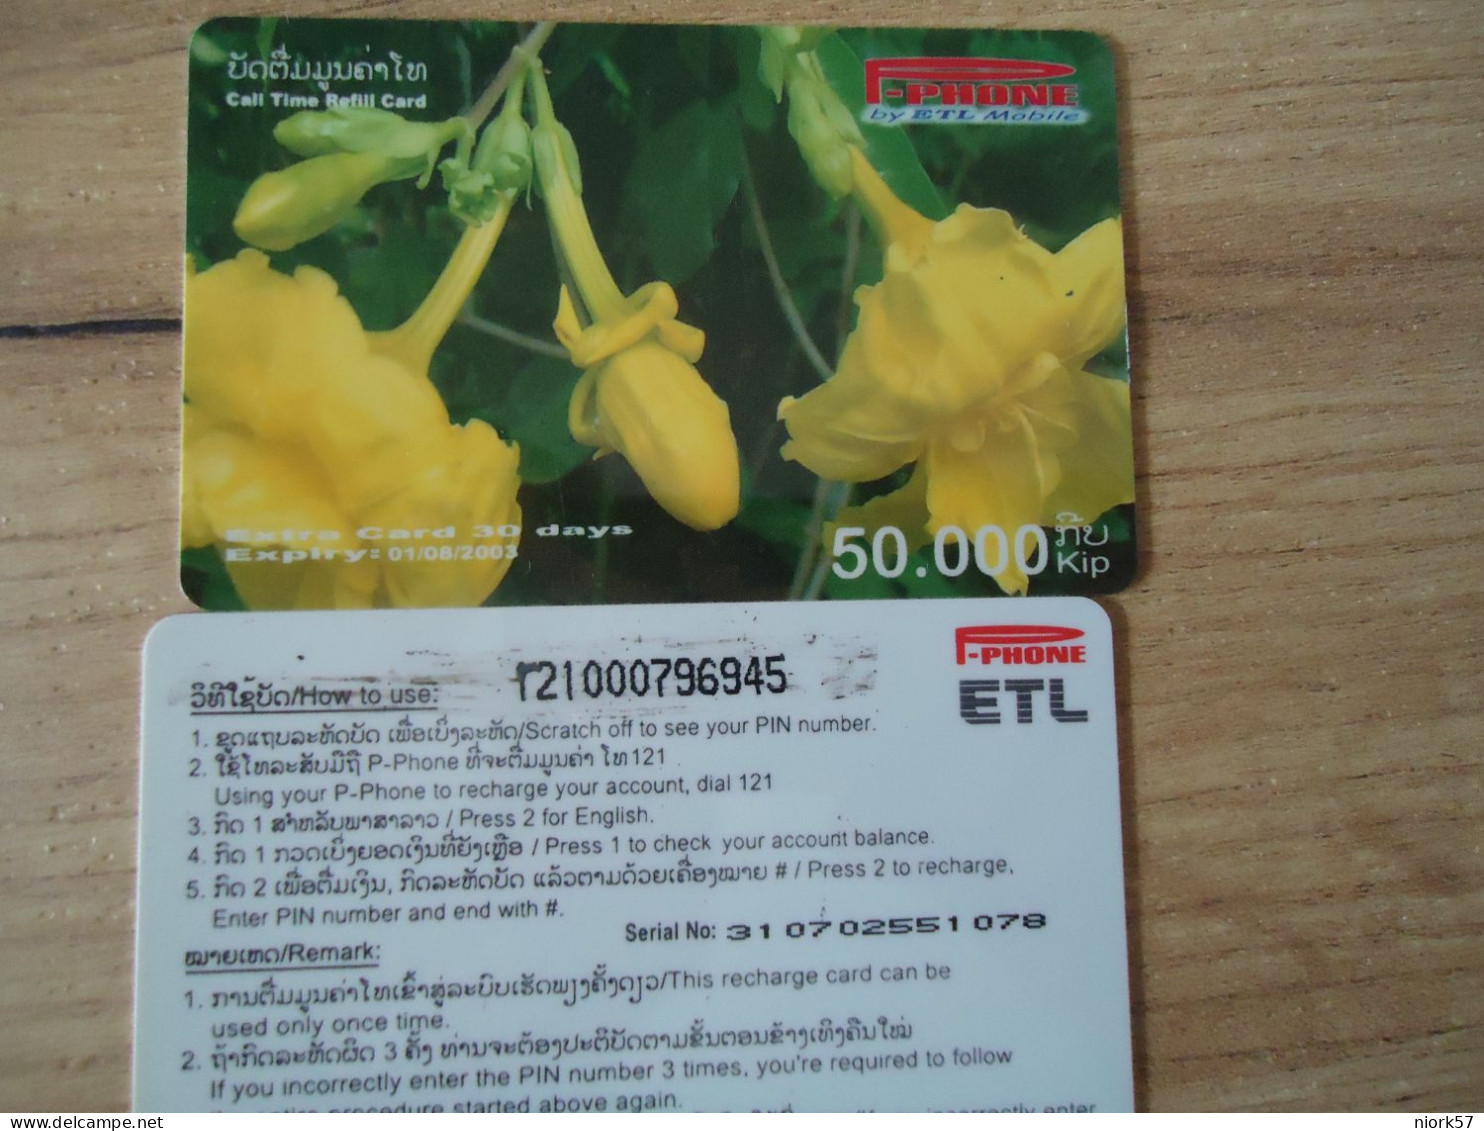 LAOS USED CARDS  PLANTS FLOWERS - Flores